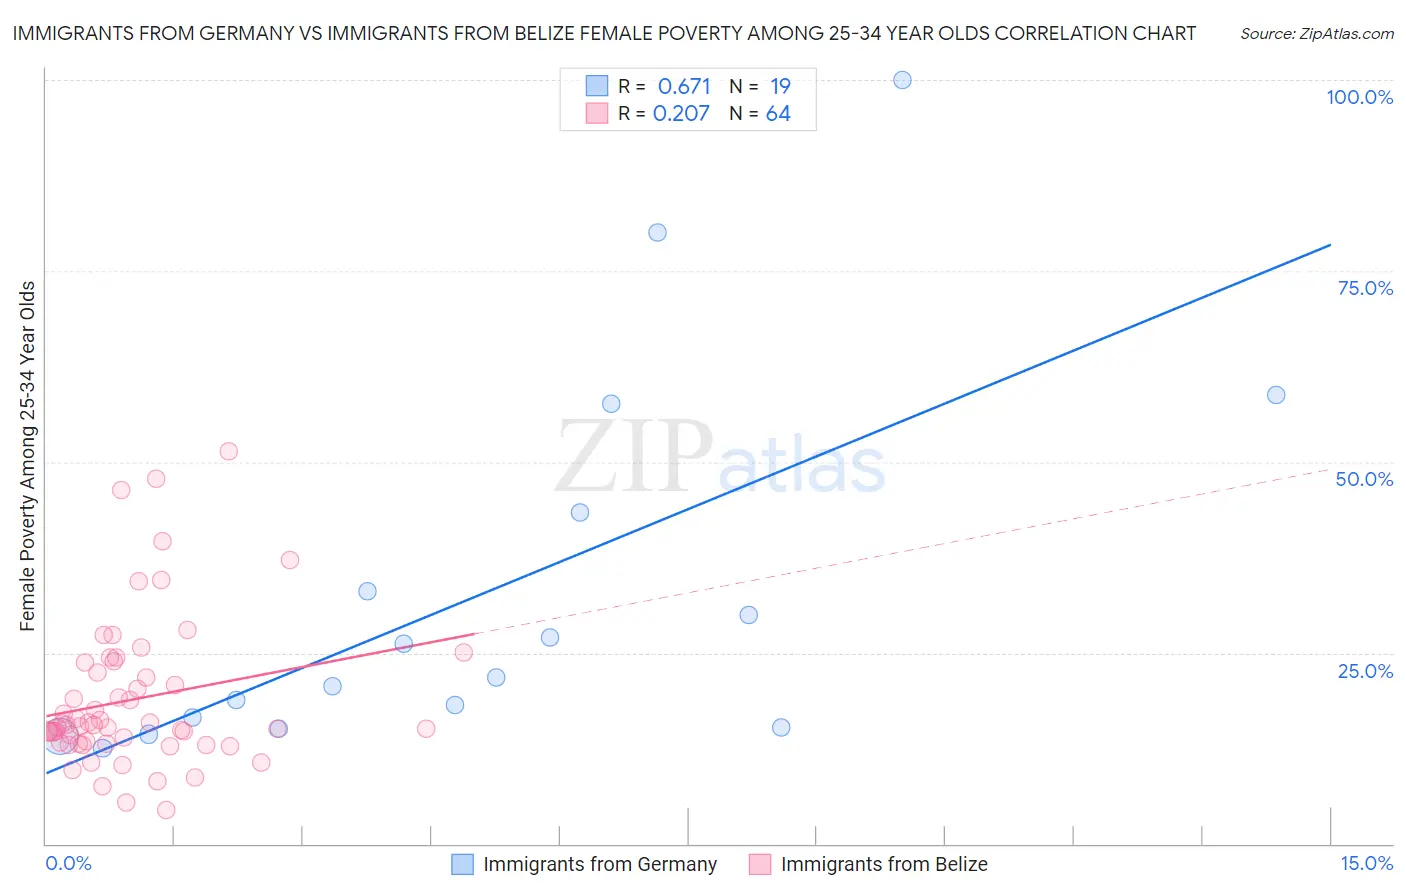 Immigrants from Germany vs Immigrants from Belize Female Poverty Among 25-34 Year Olds